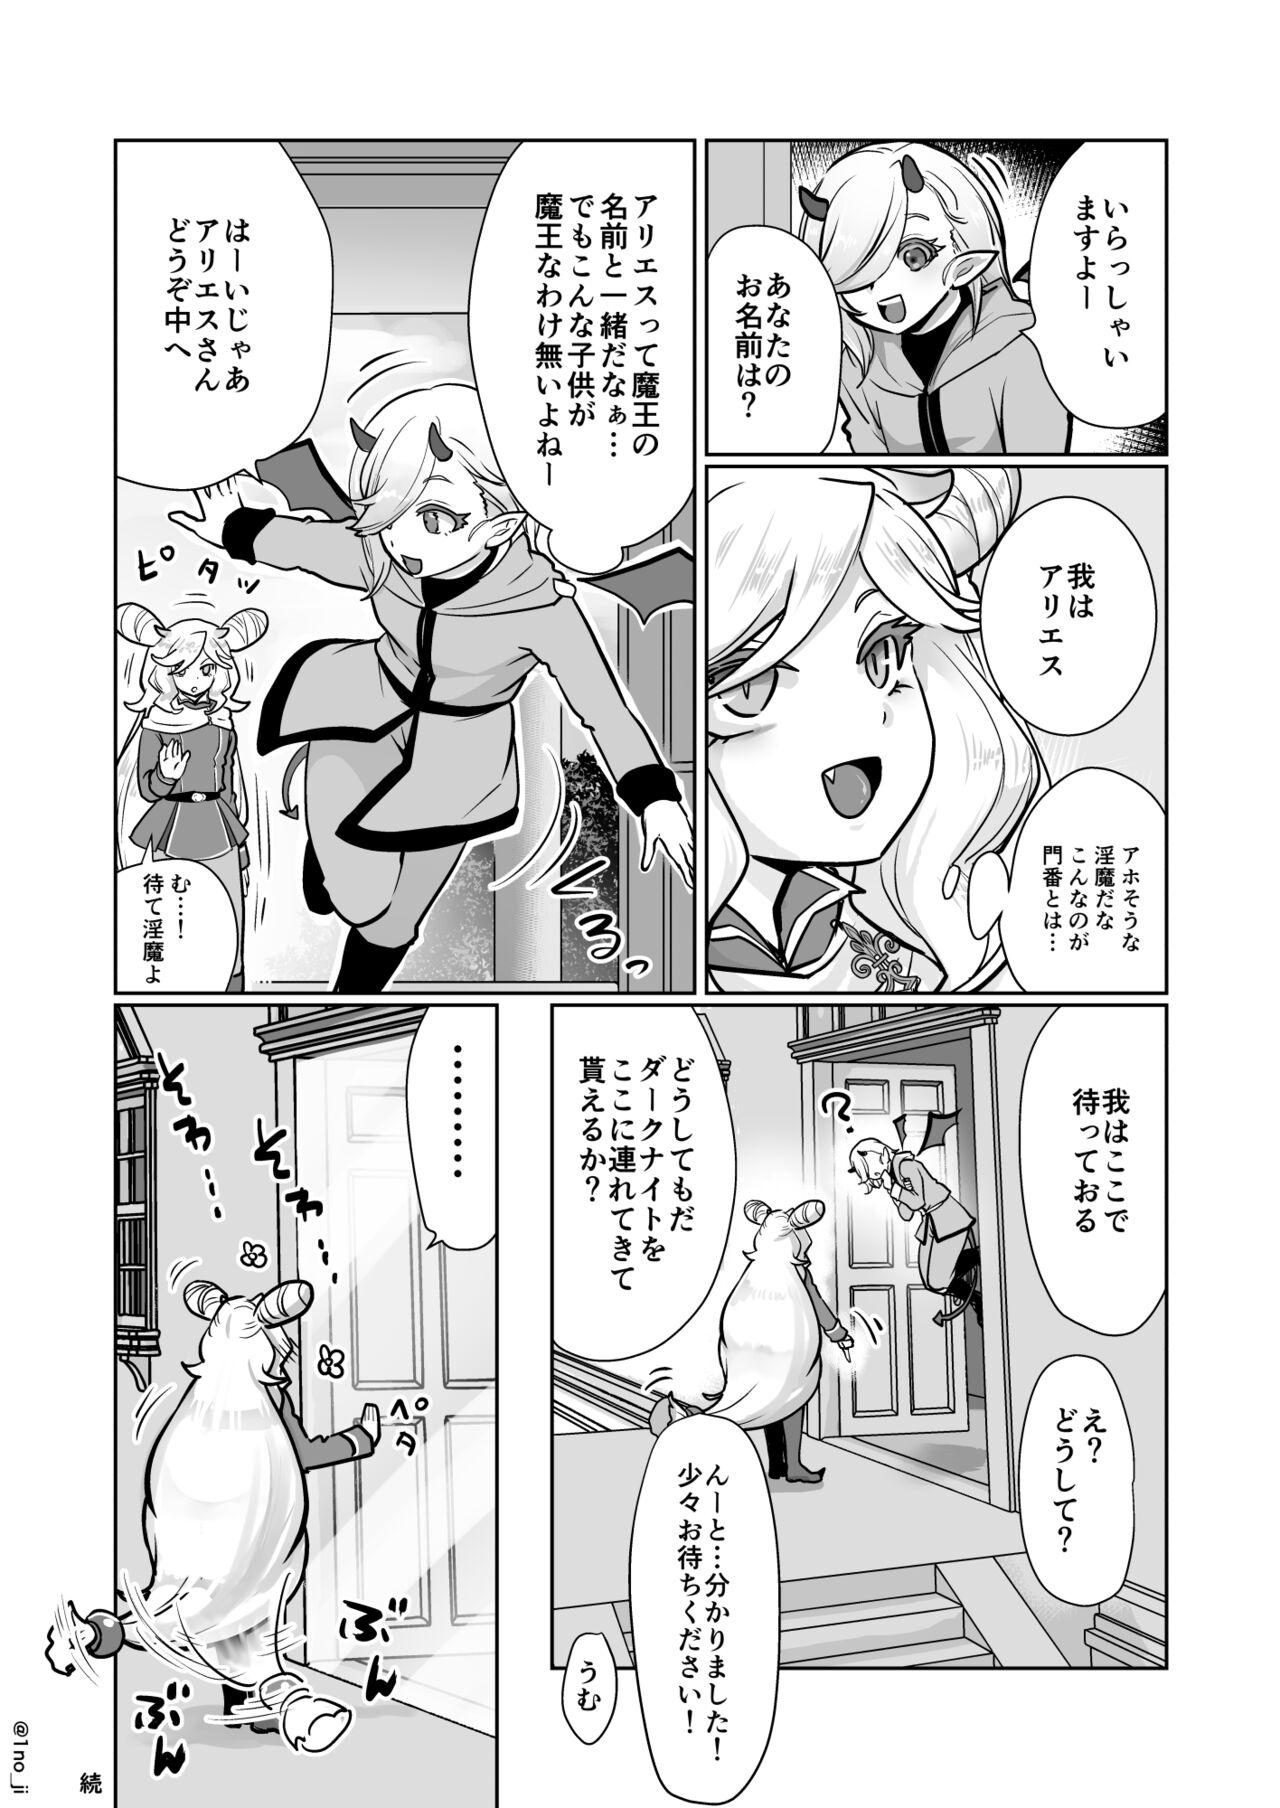 Couch 魔王軍の元幹部♂が勇者に負けてメスにされる話2【ダークナイトさんシリーズ】 - Original Groping - Page 7